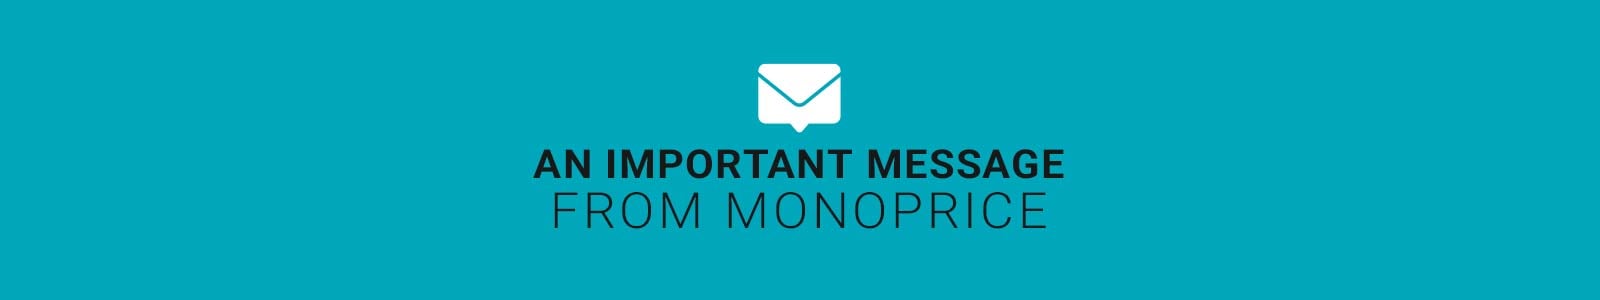 An Important Message from Monoprice